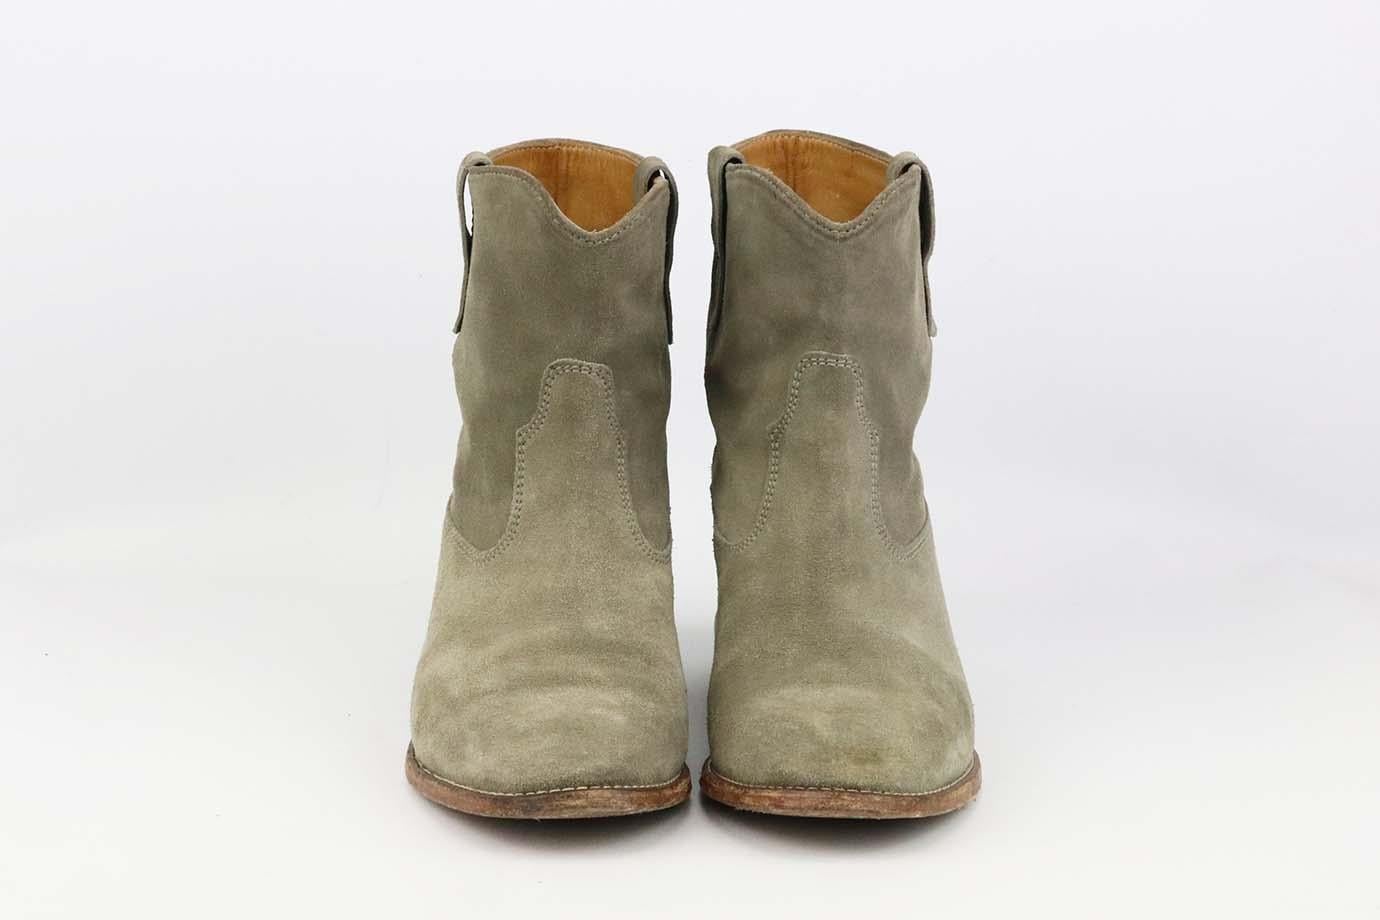 These 'Crisi' boots by Isabel Marant have a concealed interior 70mm wedge heel that provides a little extra height, made from plush faded-beige suede, they have almond-shaped toes and are detailed with Western-inspired topstitching. Sole measures